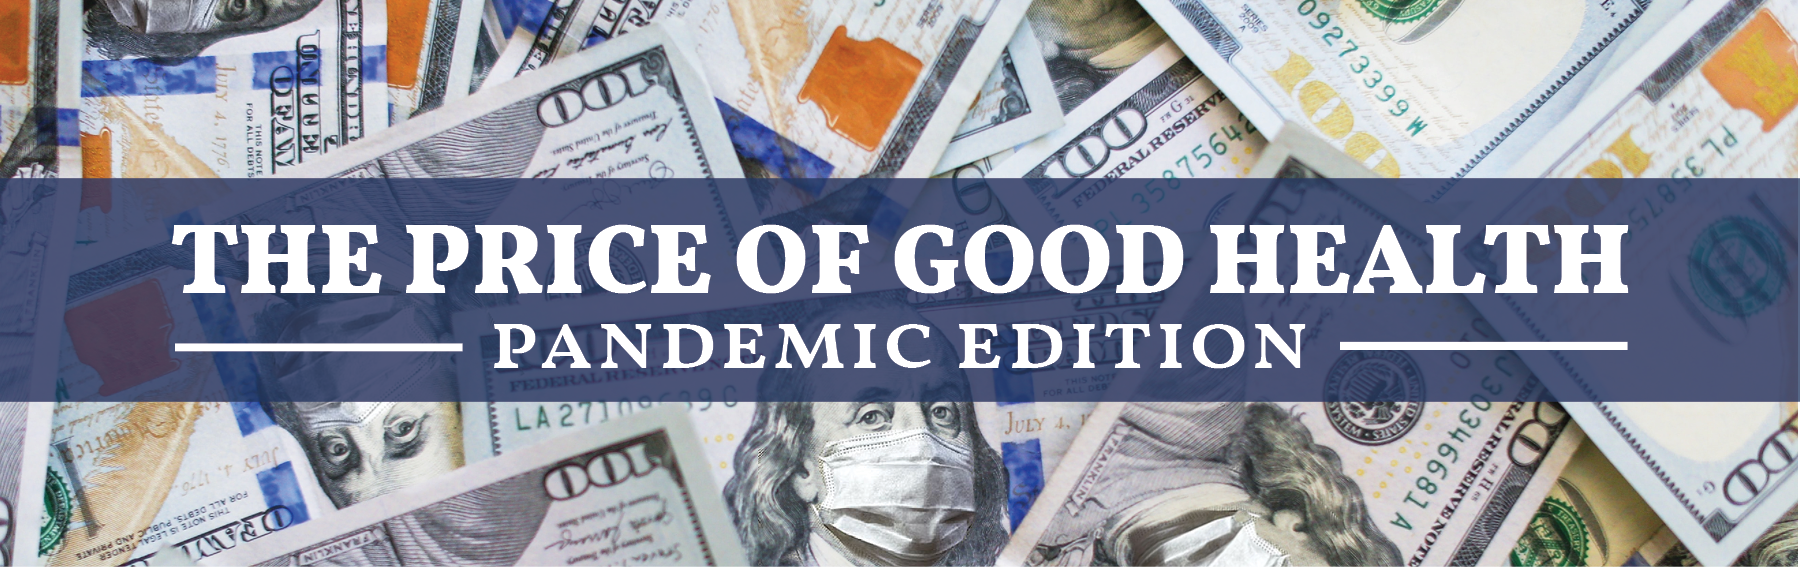 Money in the background of text that says "The price of good health: Pandemic edition"